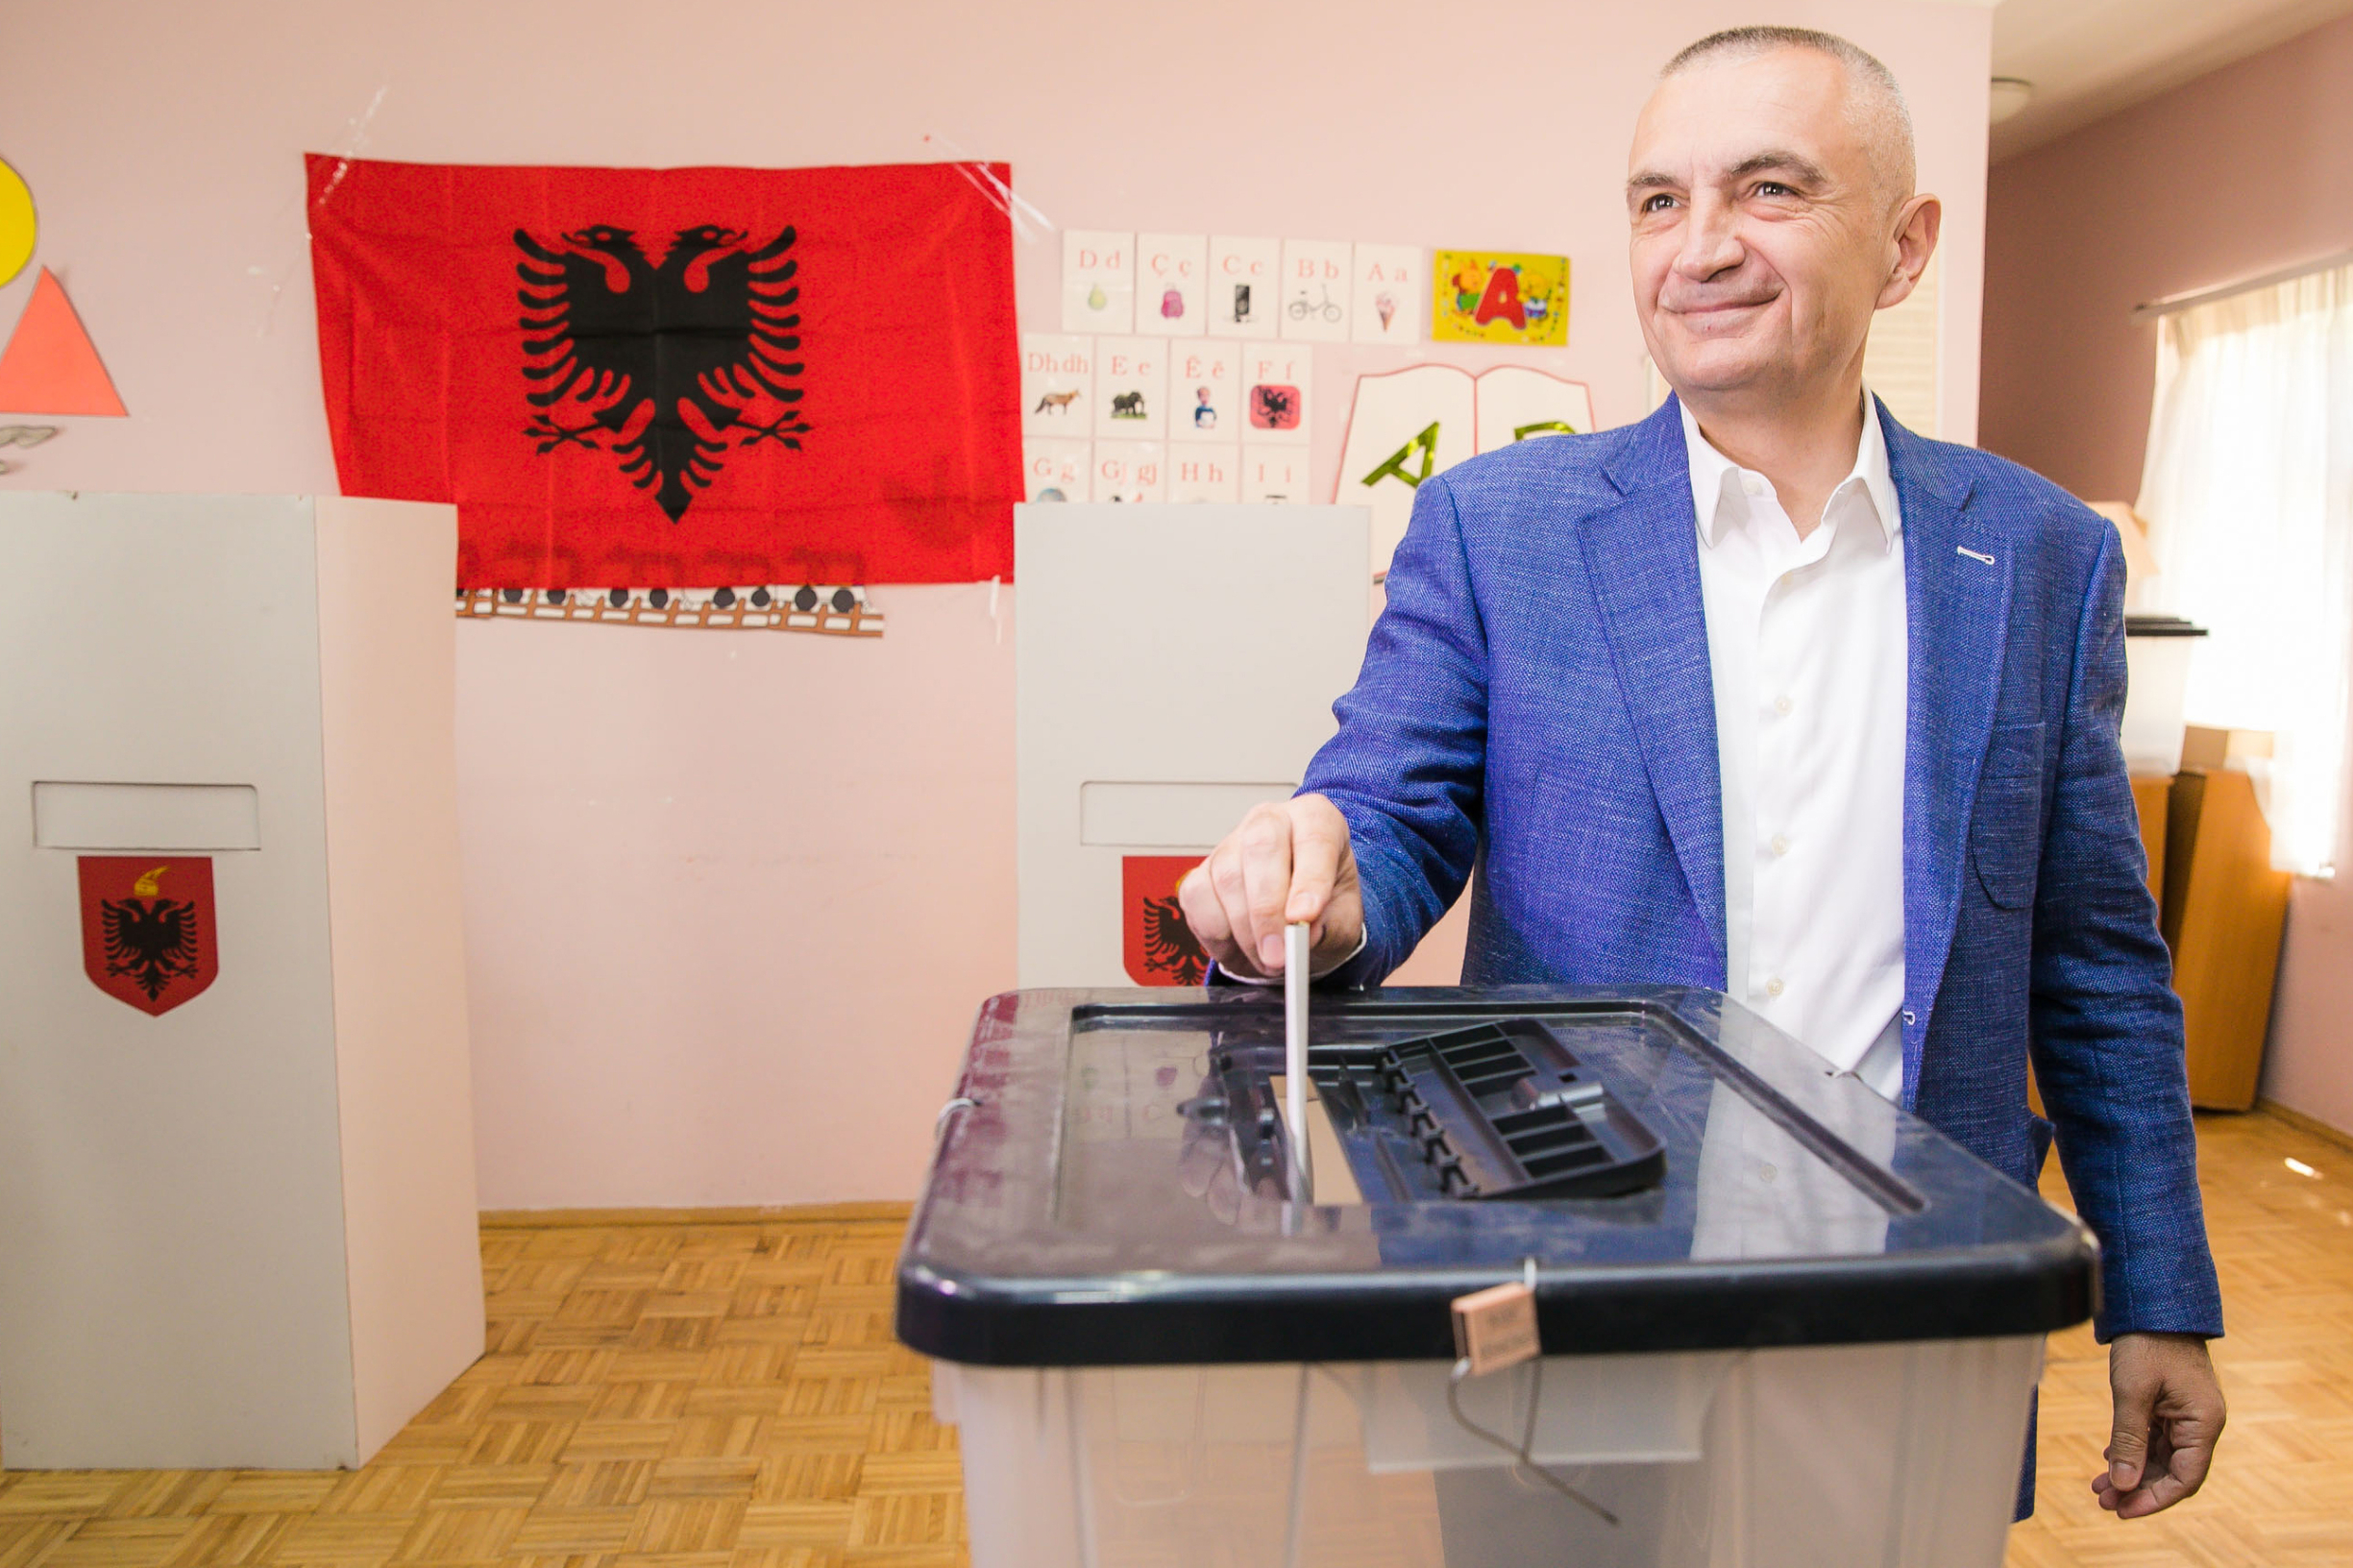 Albania's Socialist Movement for Integration (LSI) party's founder and newly elected President Ilir Meta, casts his ballot at a polling station in Tirana, during a parliamentary election on June 25, 2017. - Albania votes in a parliamentary election with Socialist Prime Minister Edi Rama hoping to boost his grip on power and lead the Balkan country into talks on European Union accession. (Photo by STRINGER / AFP)